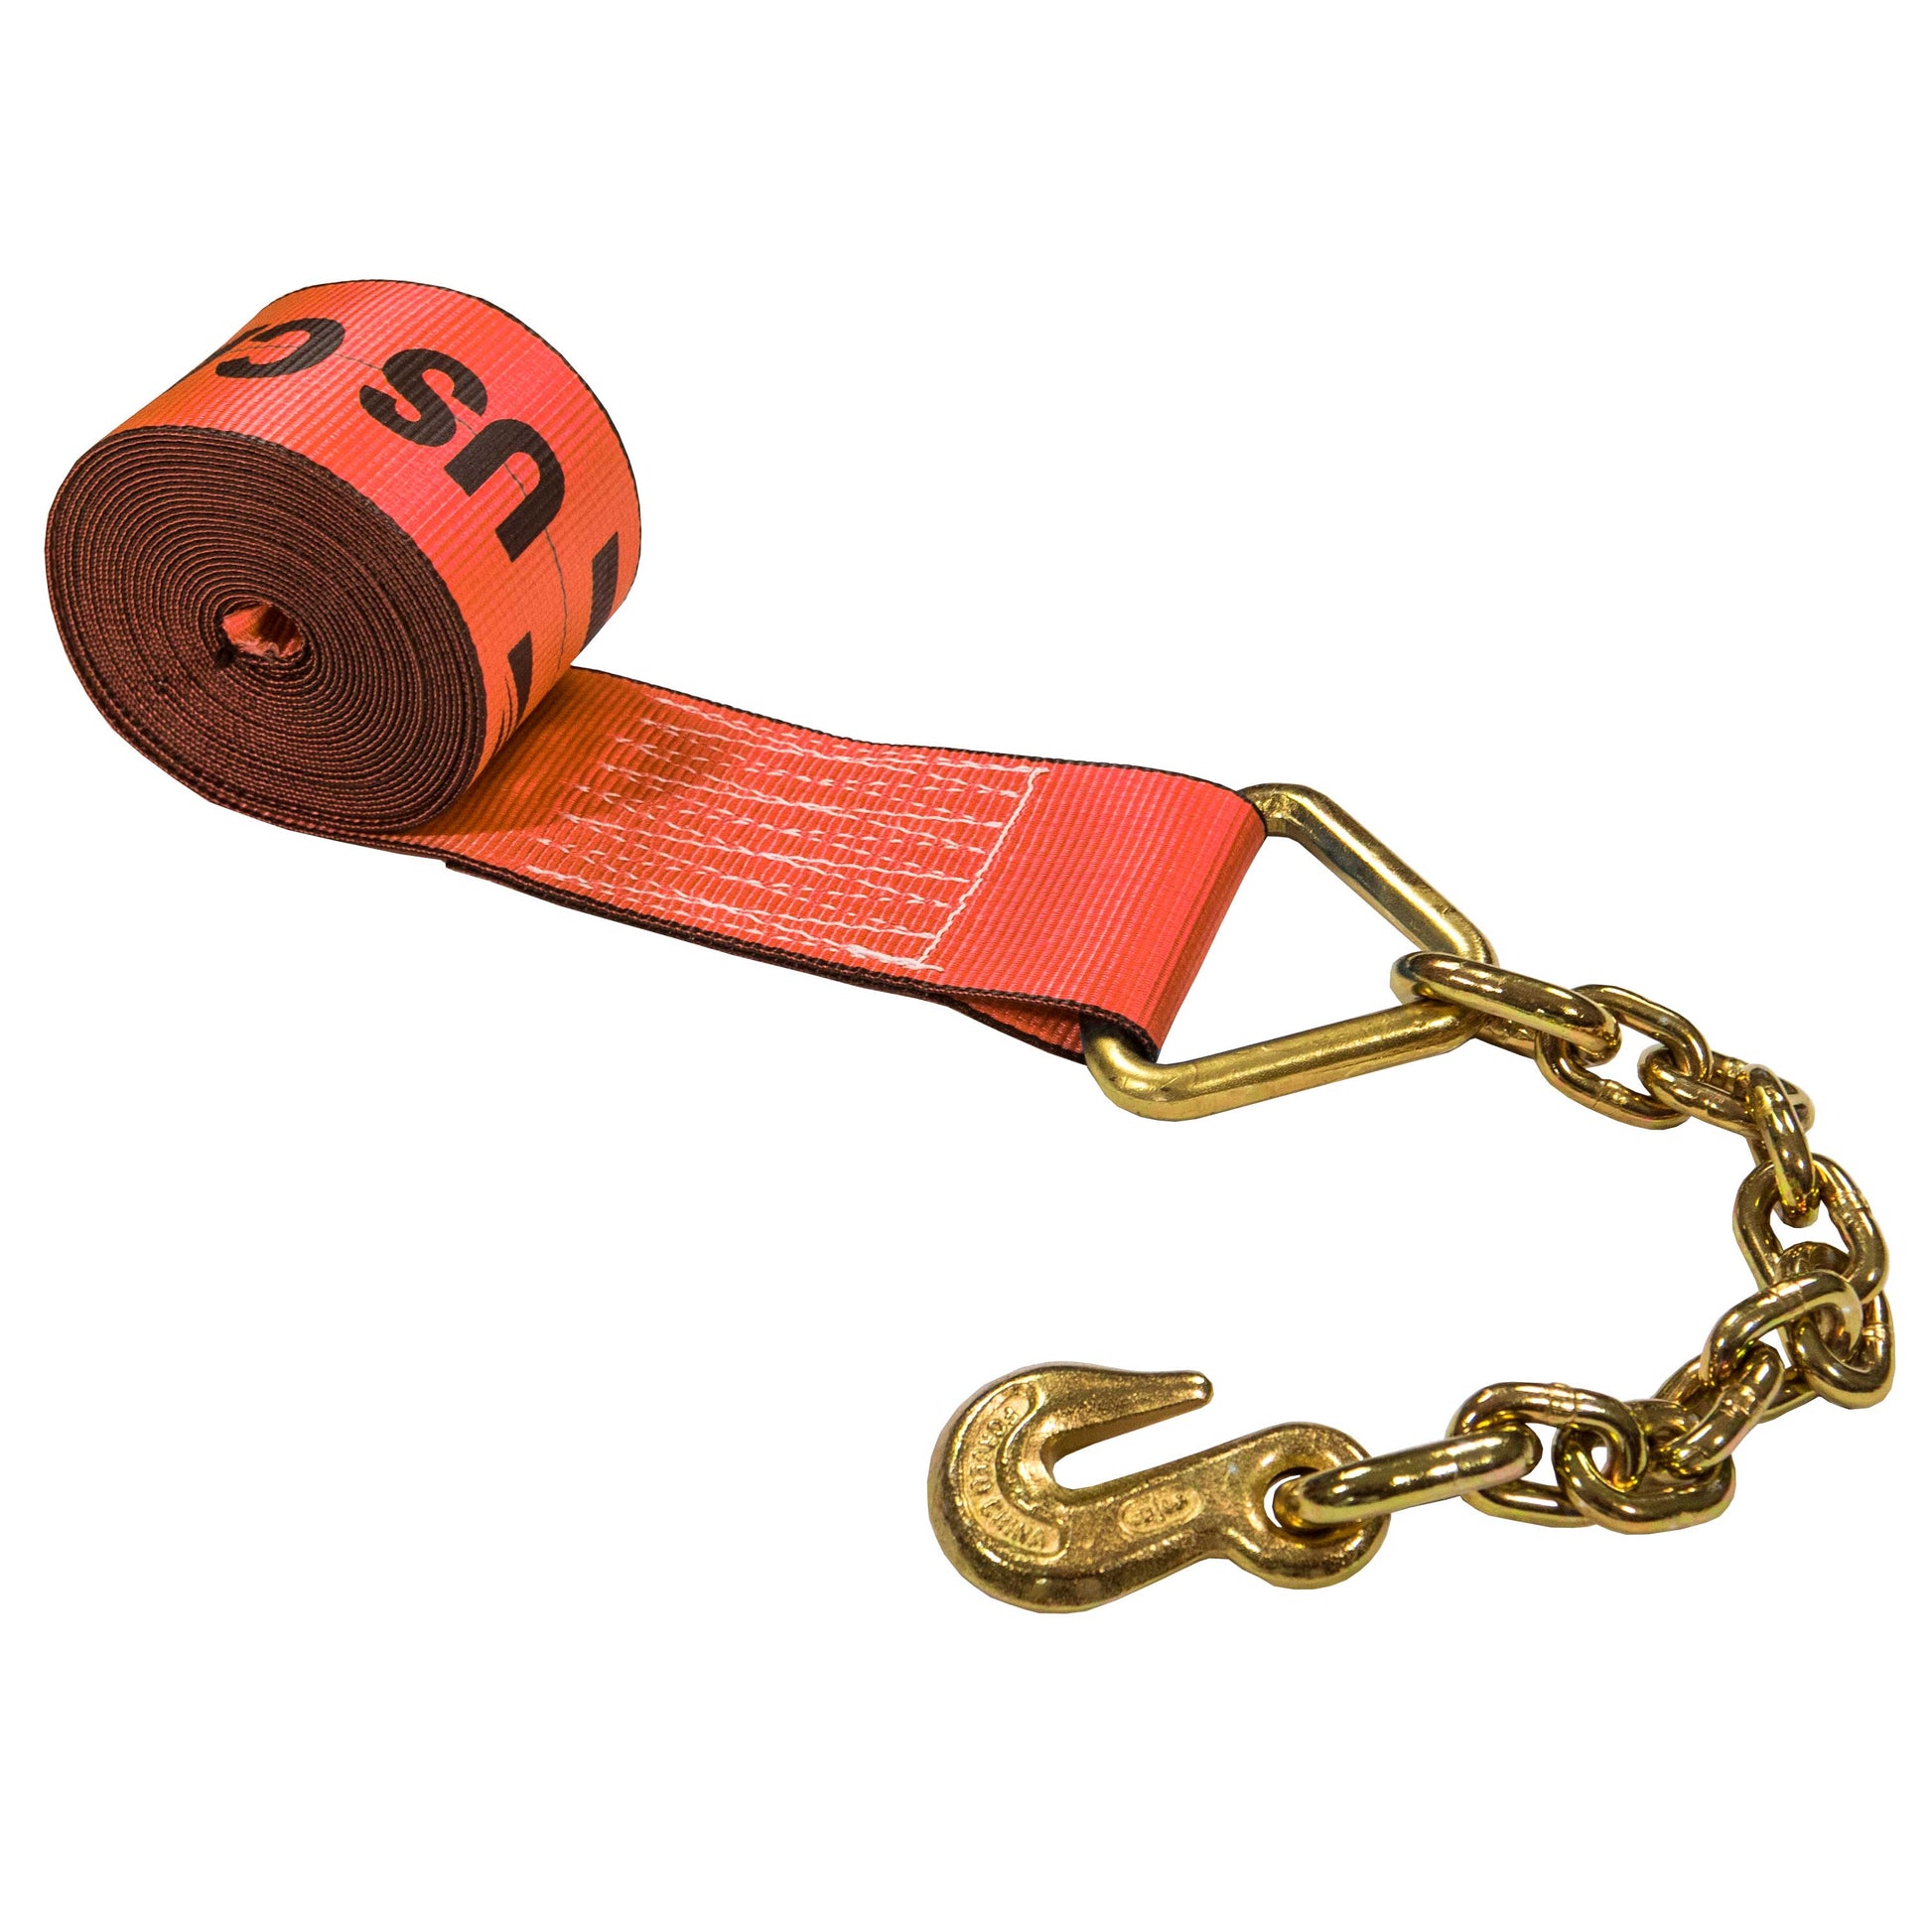 40' 4" heavy-duty red chain extension winch strap